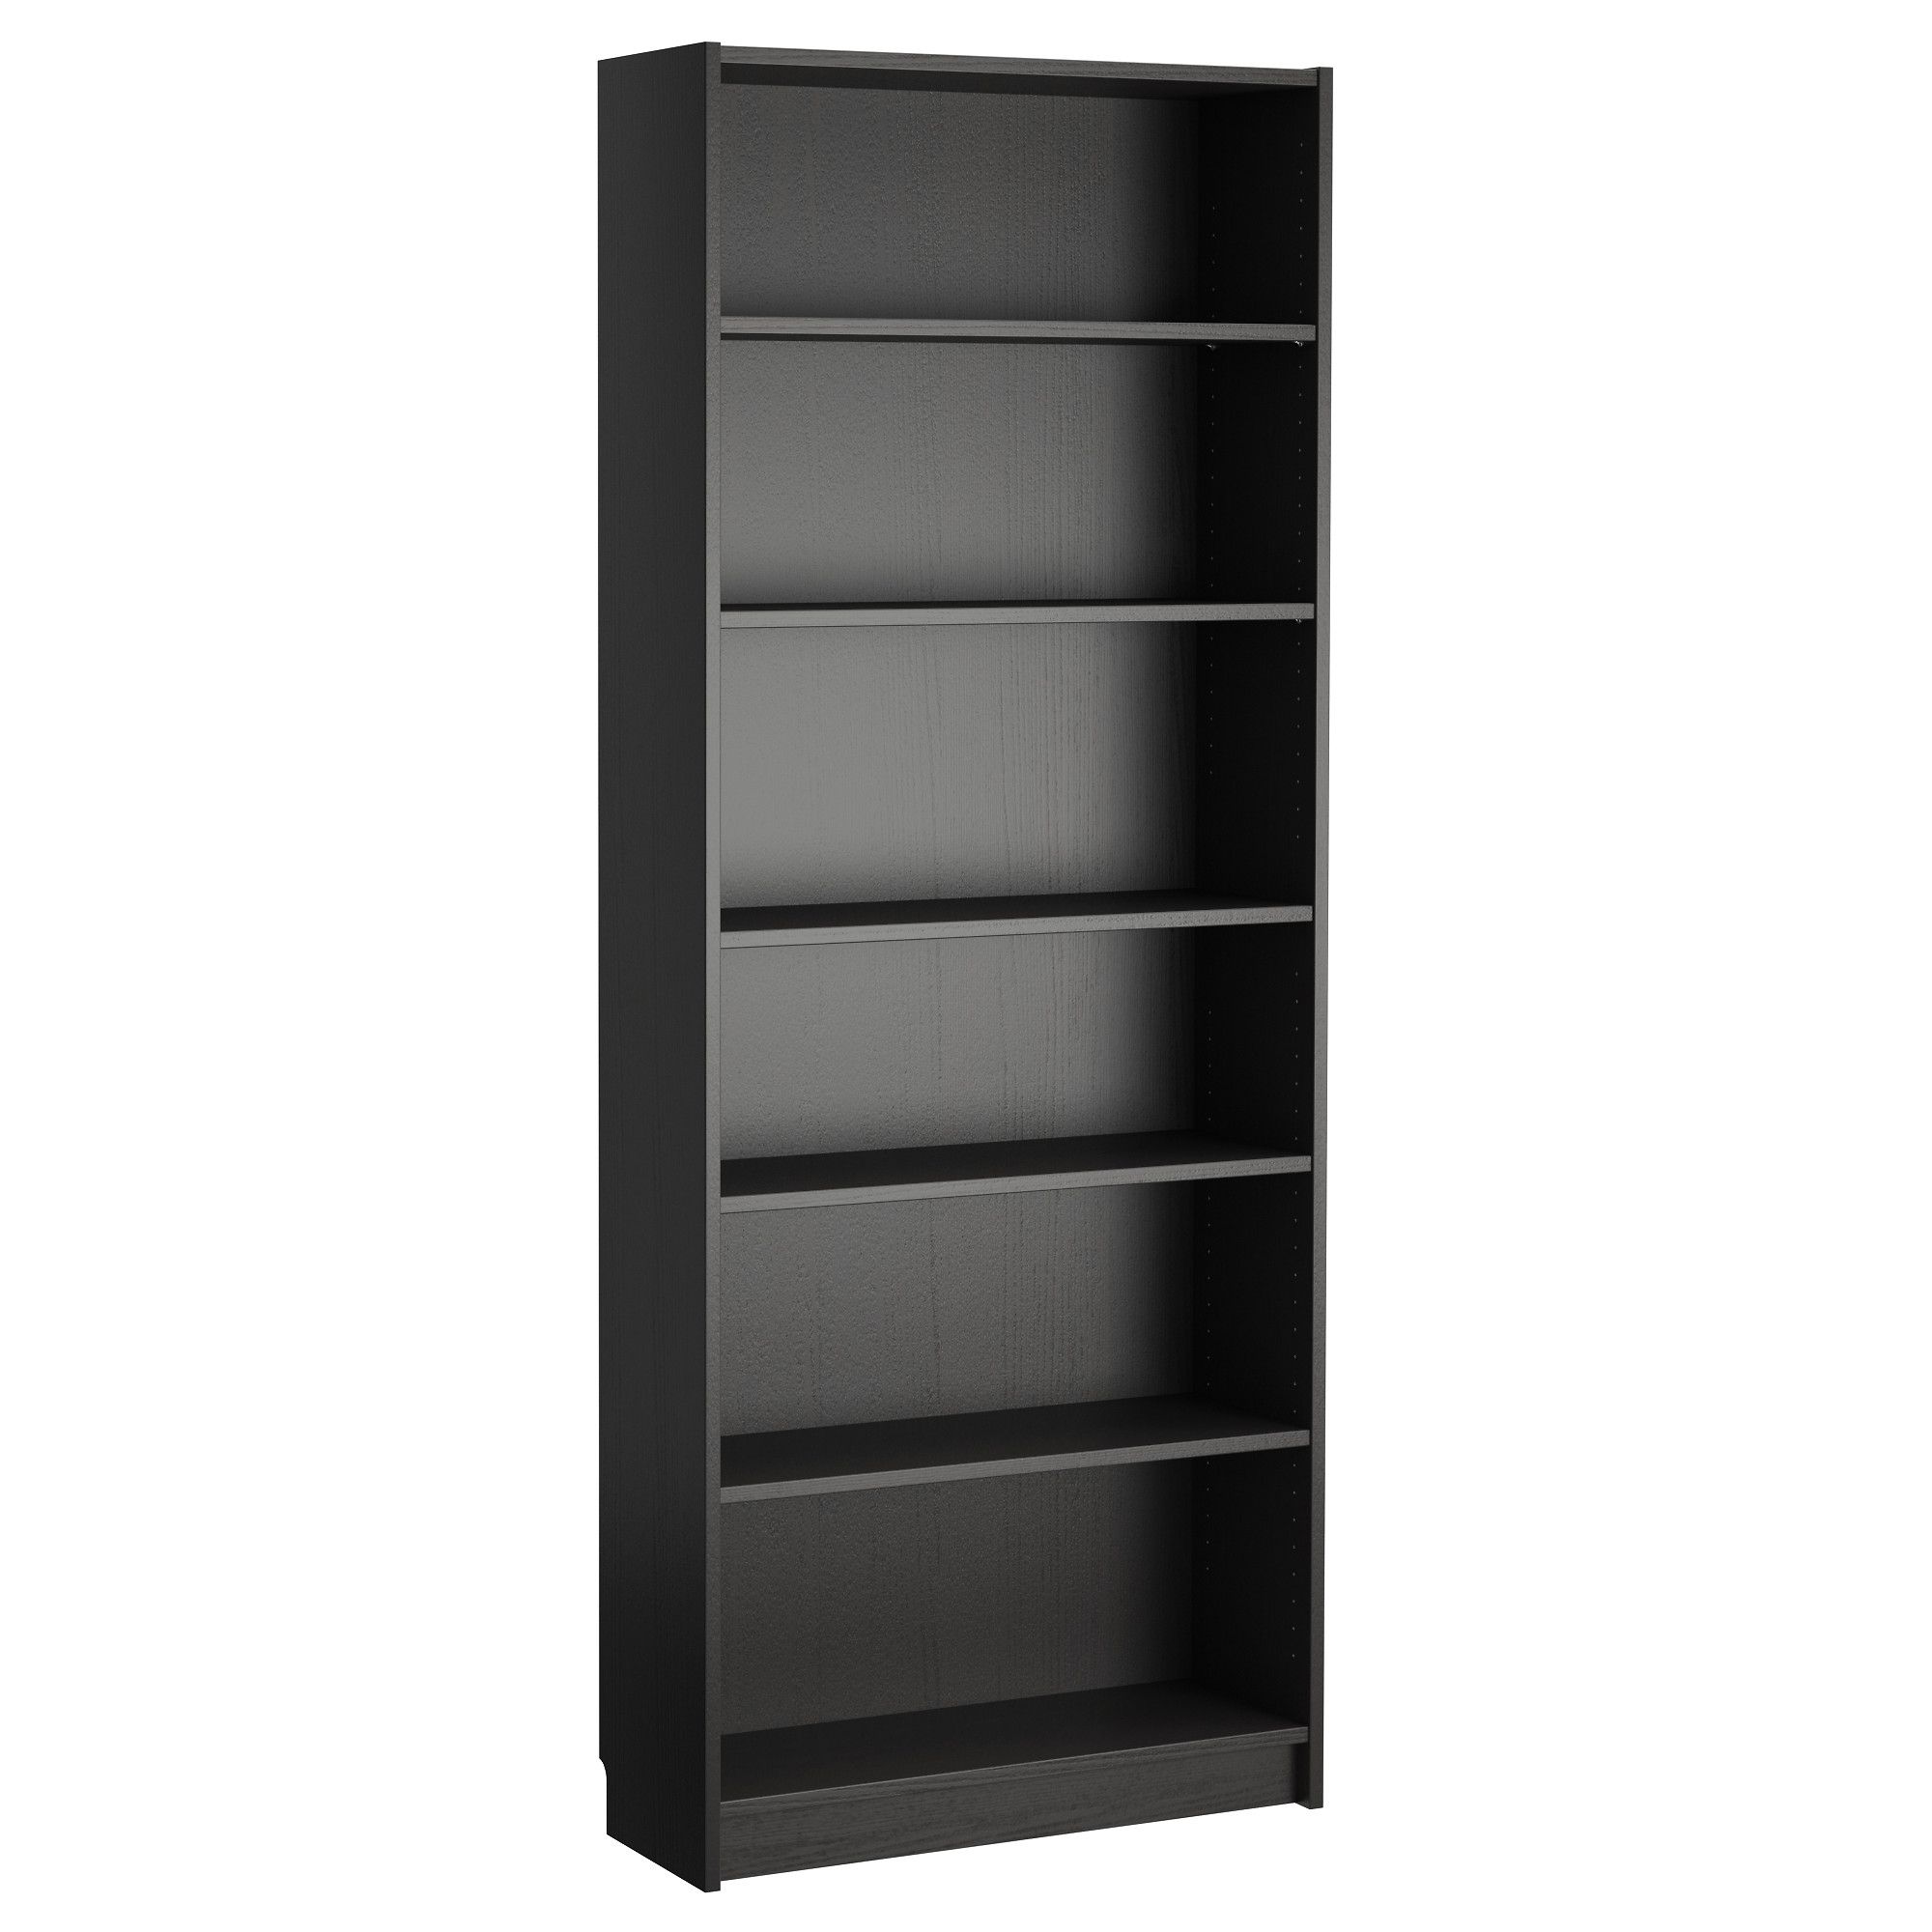 2018 Billy Bookcase – Black Brown – Ikea With Black Bookcases With Doors (View 9 of 15)